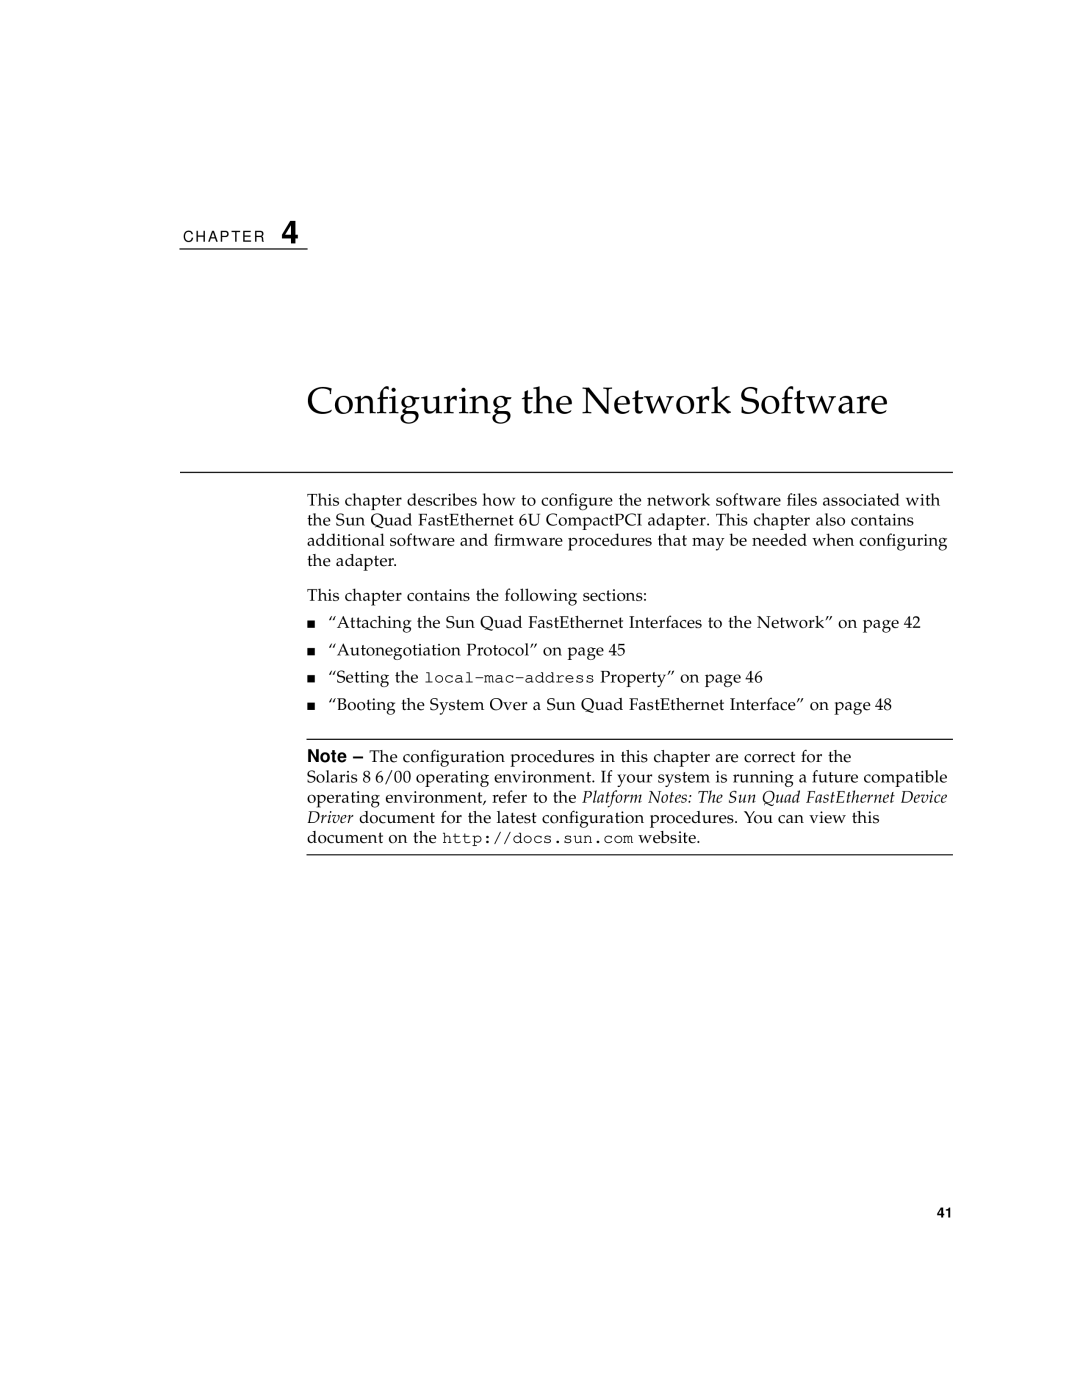 Sun Microsystems 6U manual Configuring the Network Software 